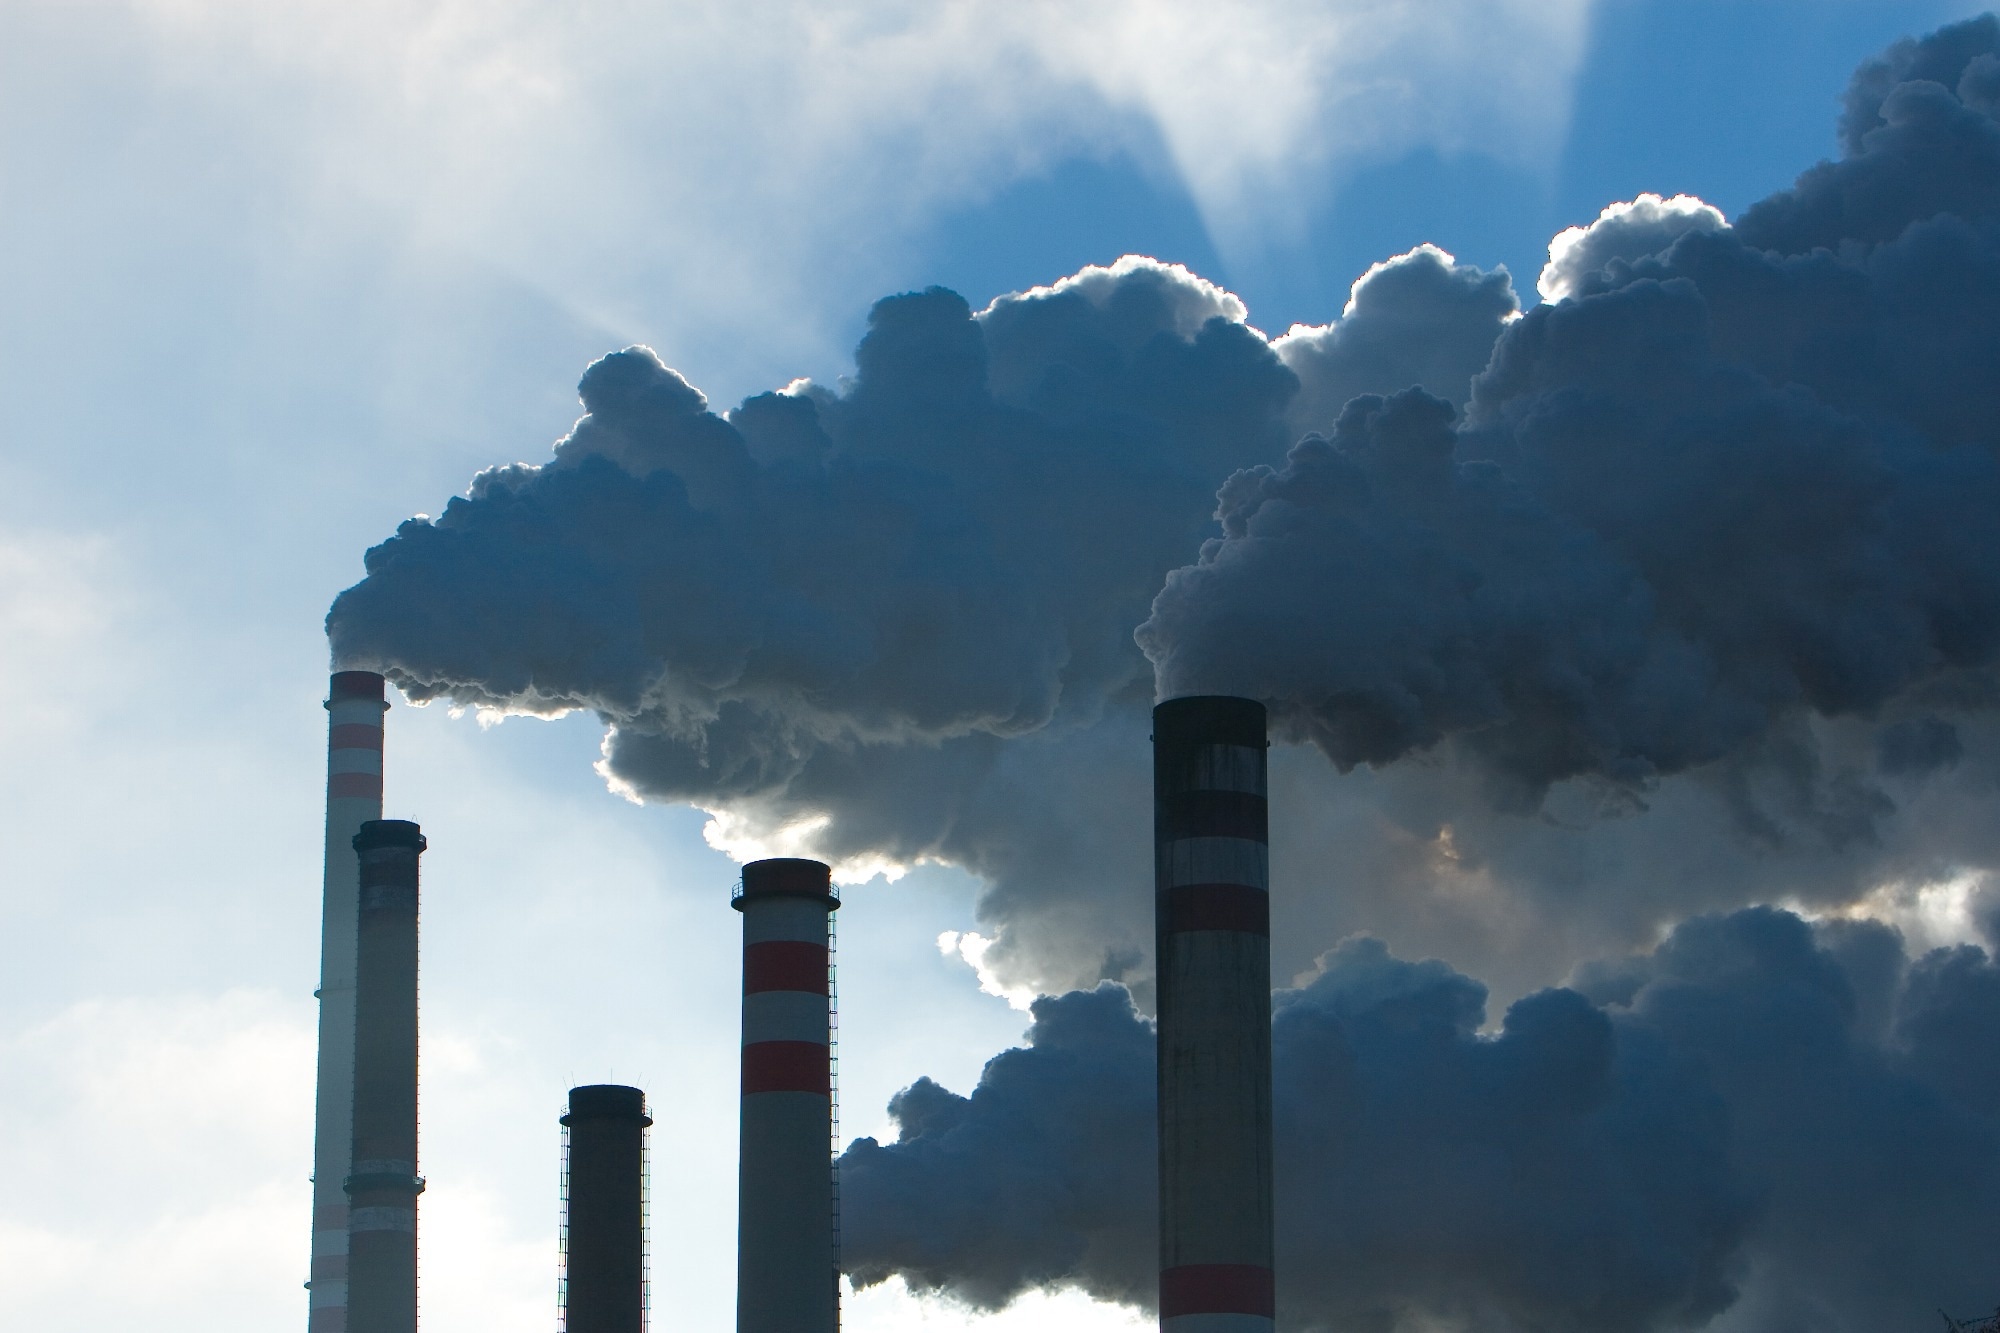 Study: Addressing Discrepancies in Scope 3 Emissions Reporting and Improving Predictive Accuracy Using Machine Learning. Image credit: BESTWEB/Shutterstock